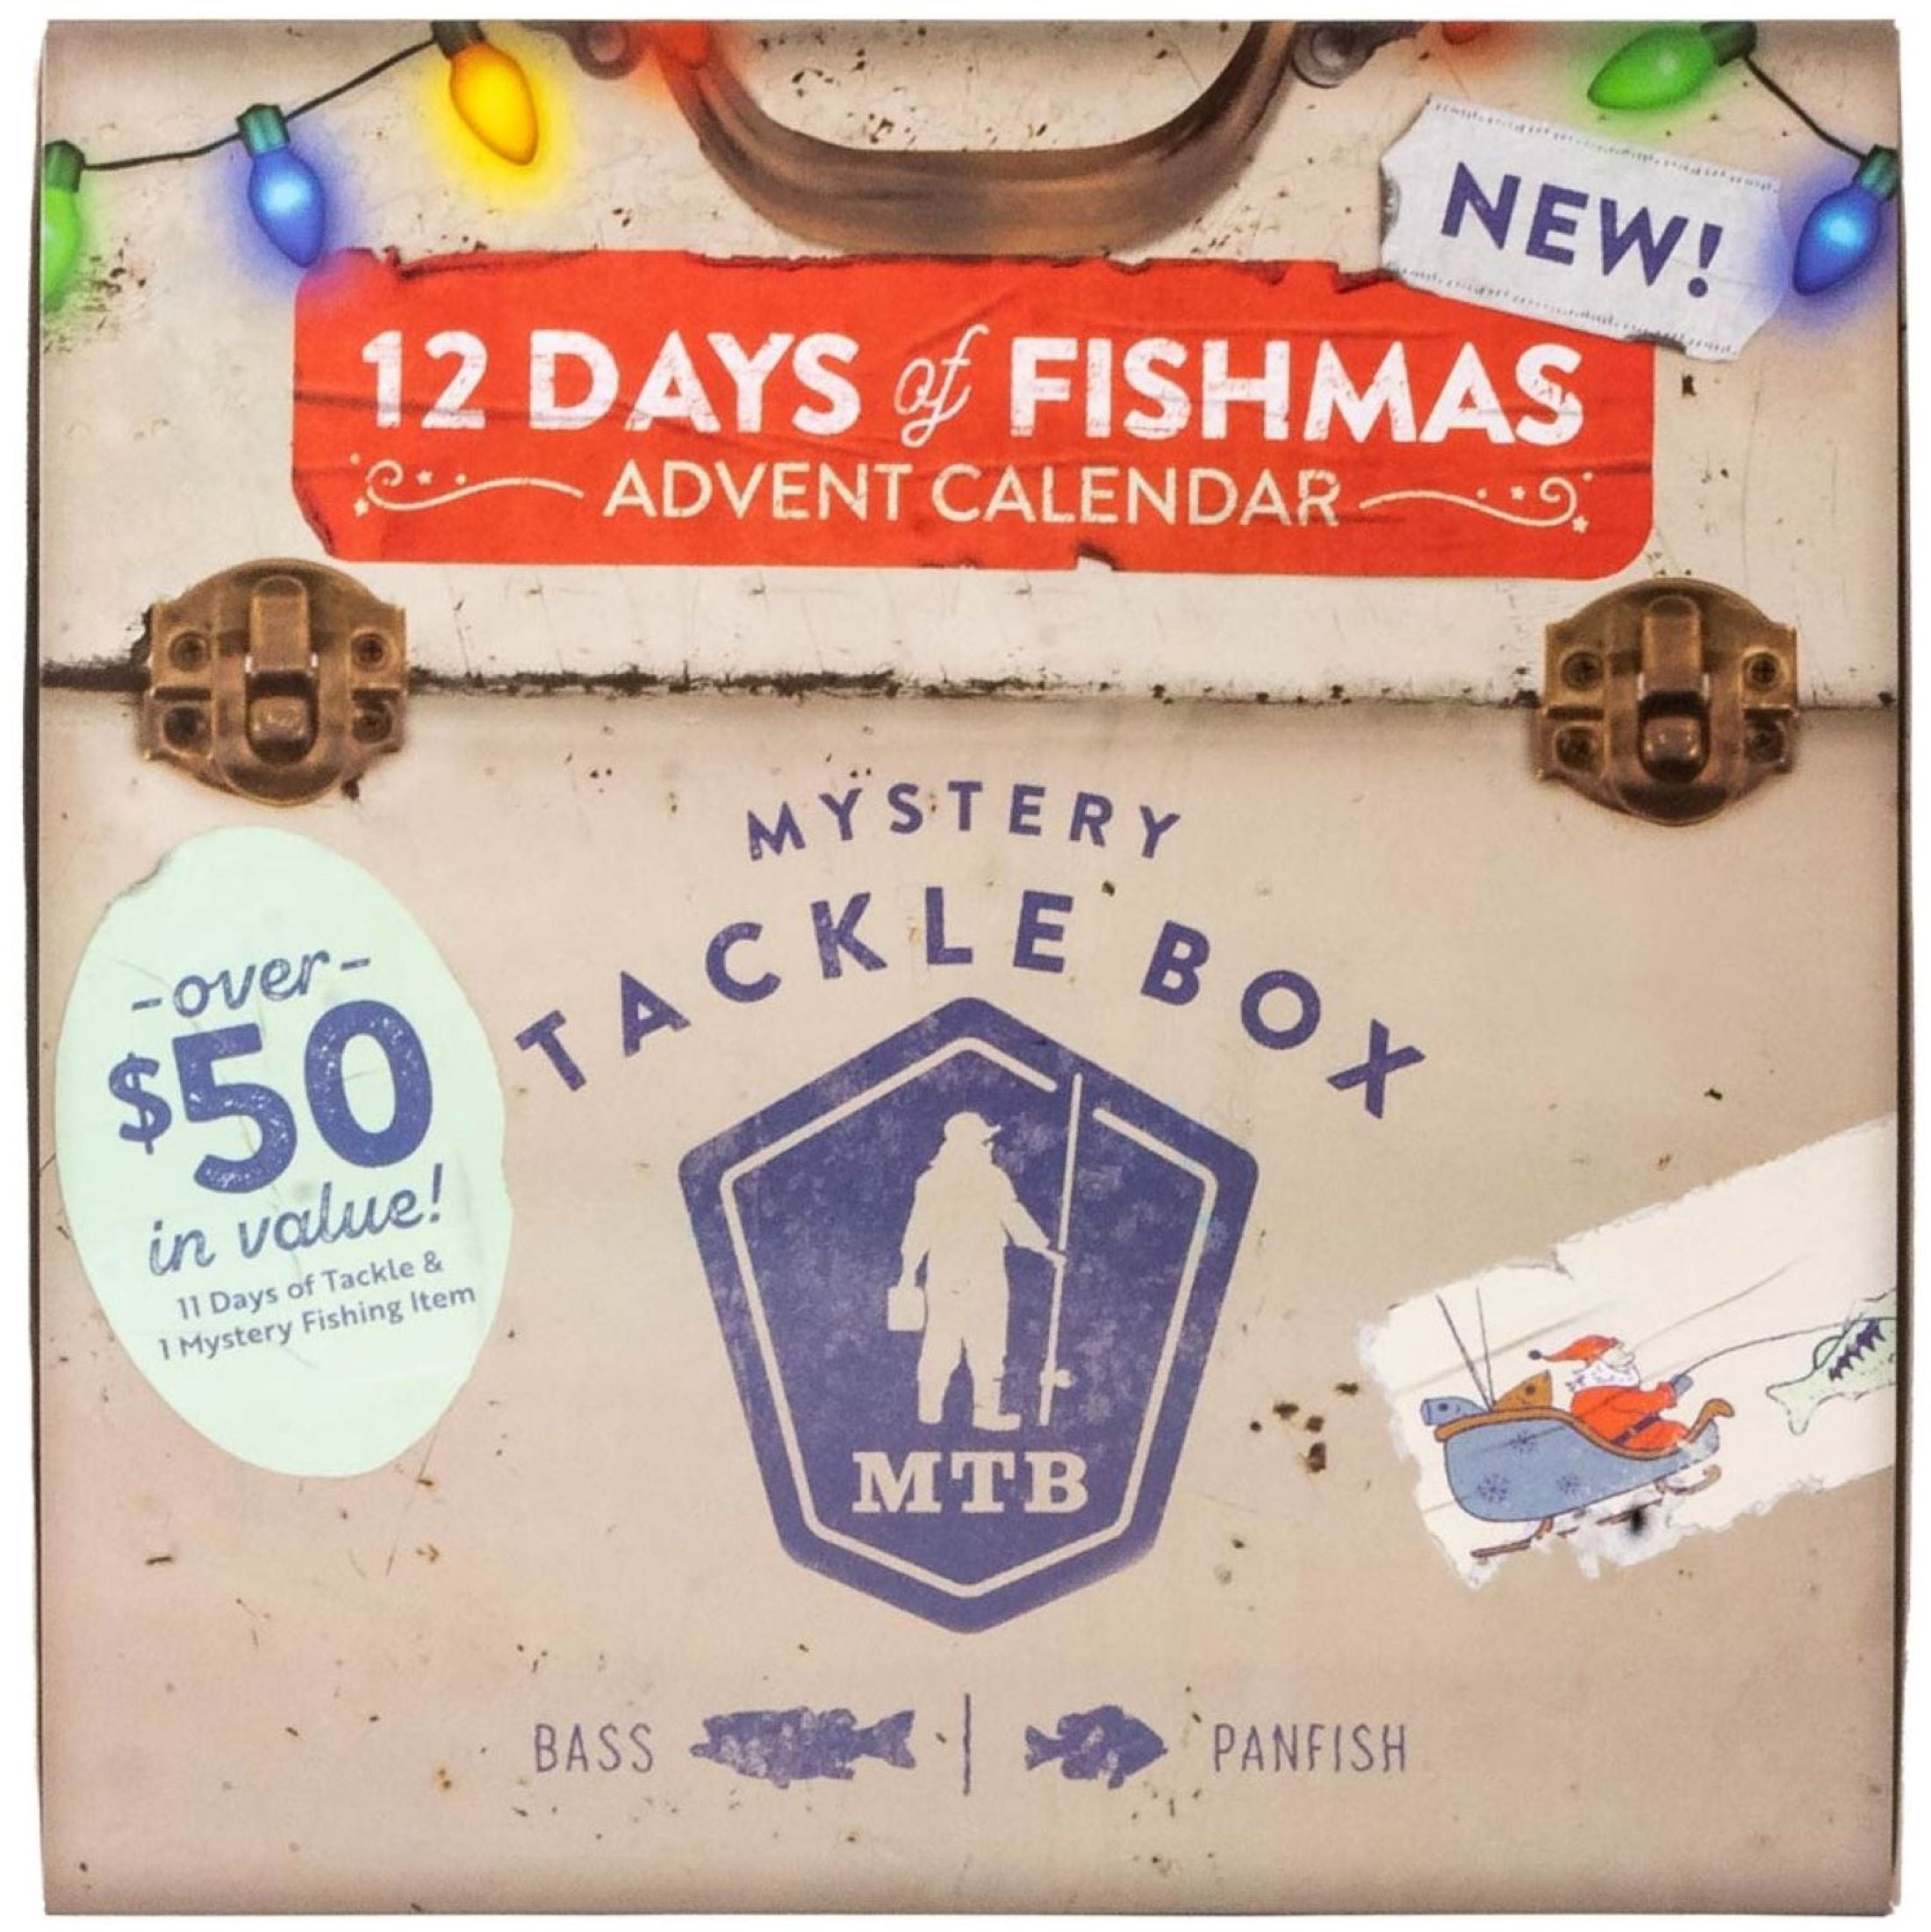 Mystery Tackle Box 12 Days of Fishmas Unboxing - Day 10 @walmart